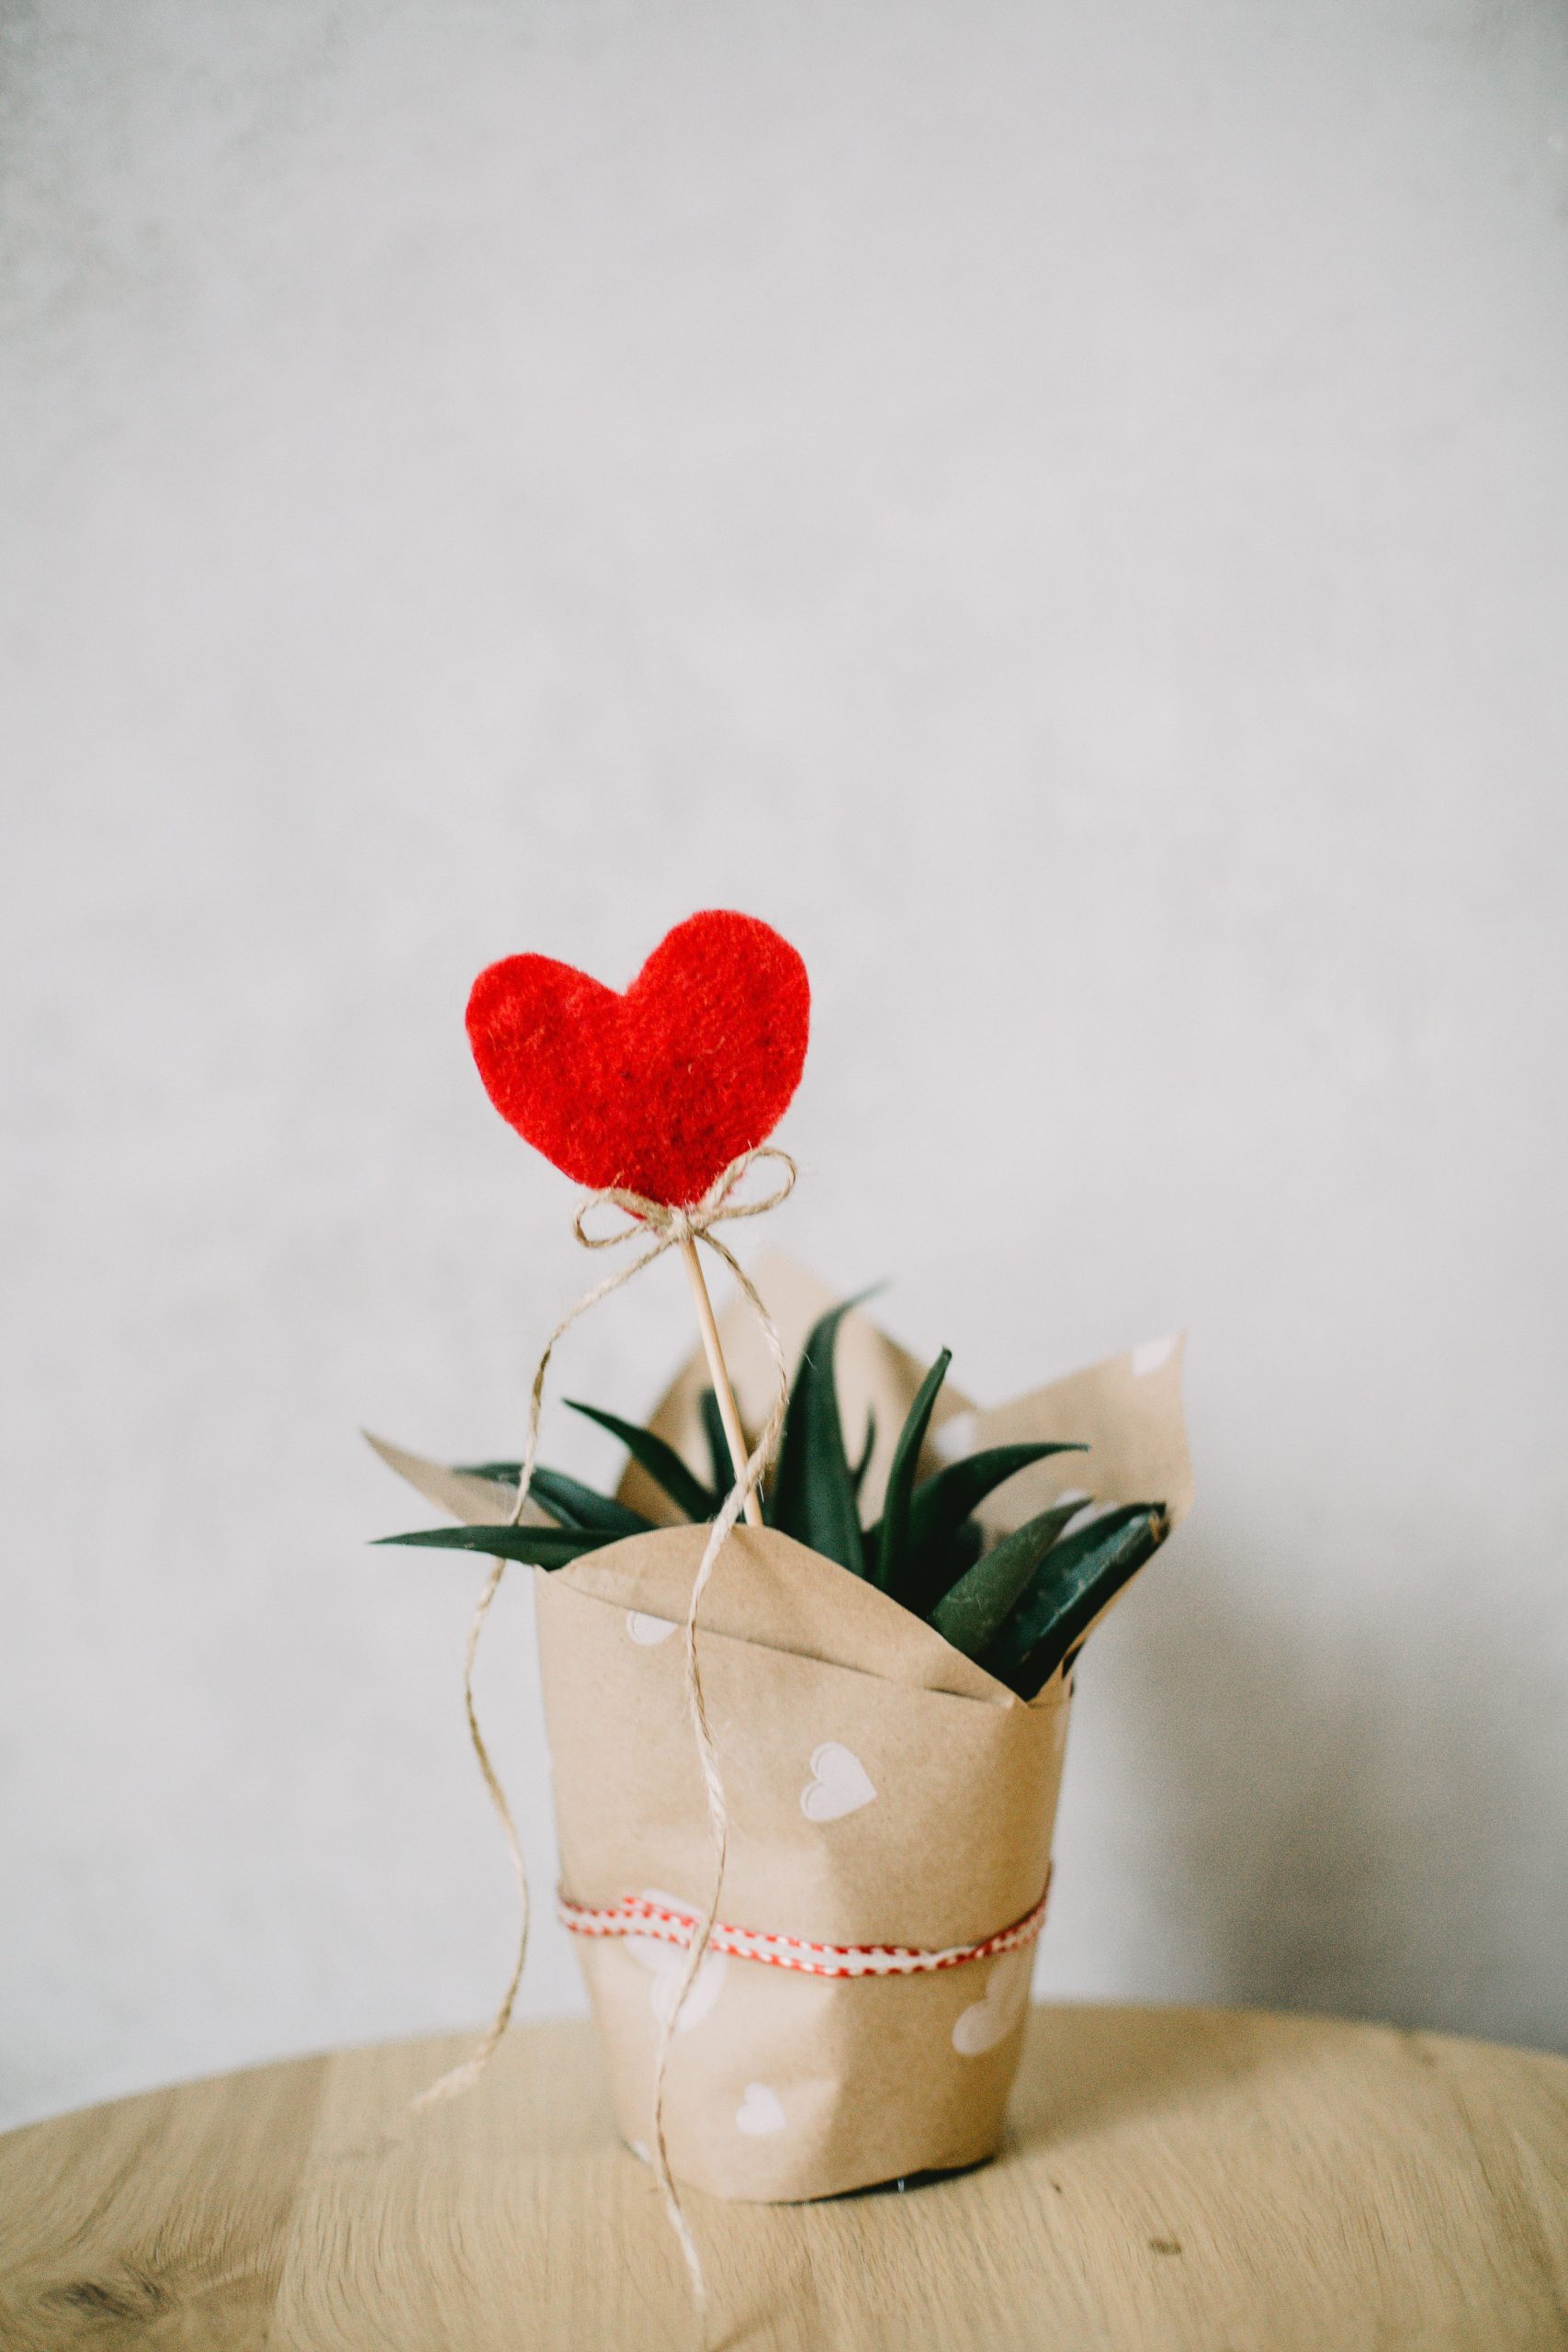 Use our tips to bring home a healthy indoor plant you'll love for many years to come. Photo: Daria Shevtsova/Pixabay healthy indoor plant